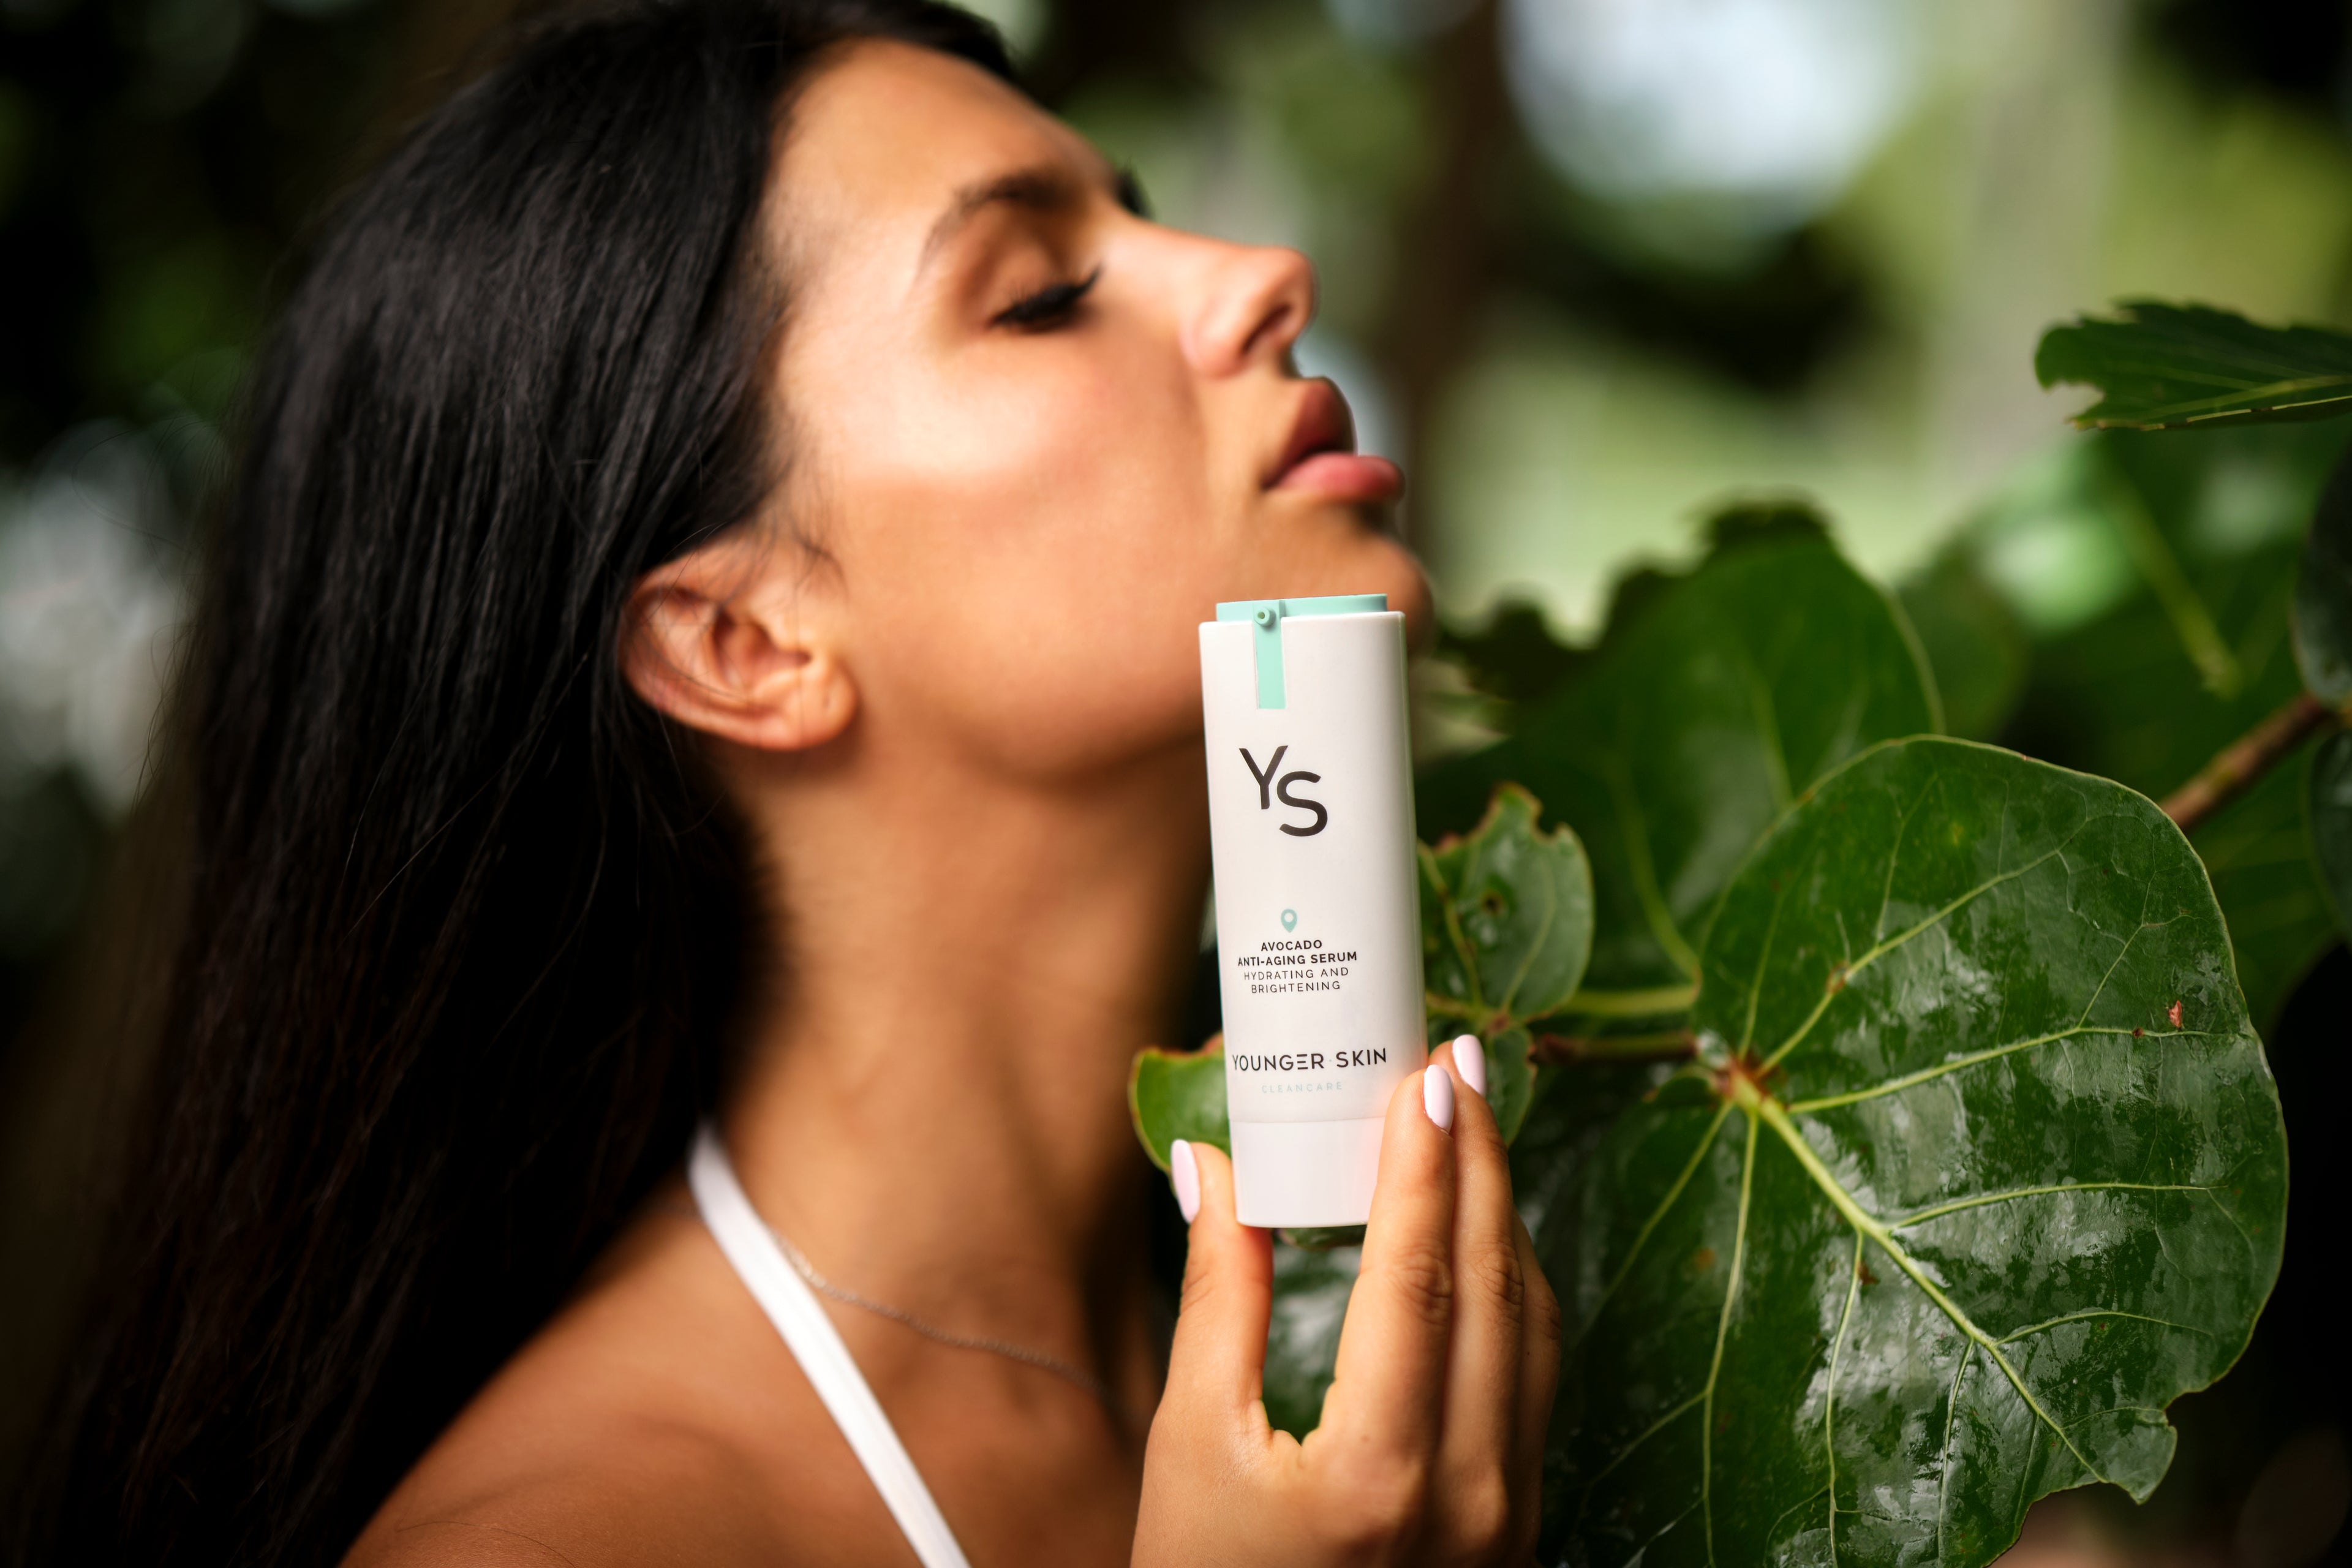 SkinCare Model in tropical environment presenting YoungerSkin Product Bottle with Anti-Aging Serum